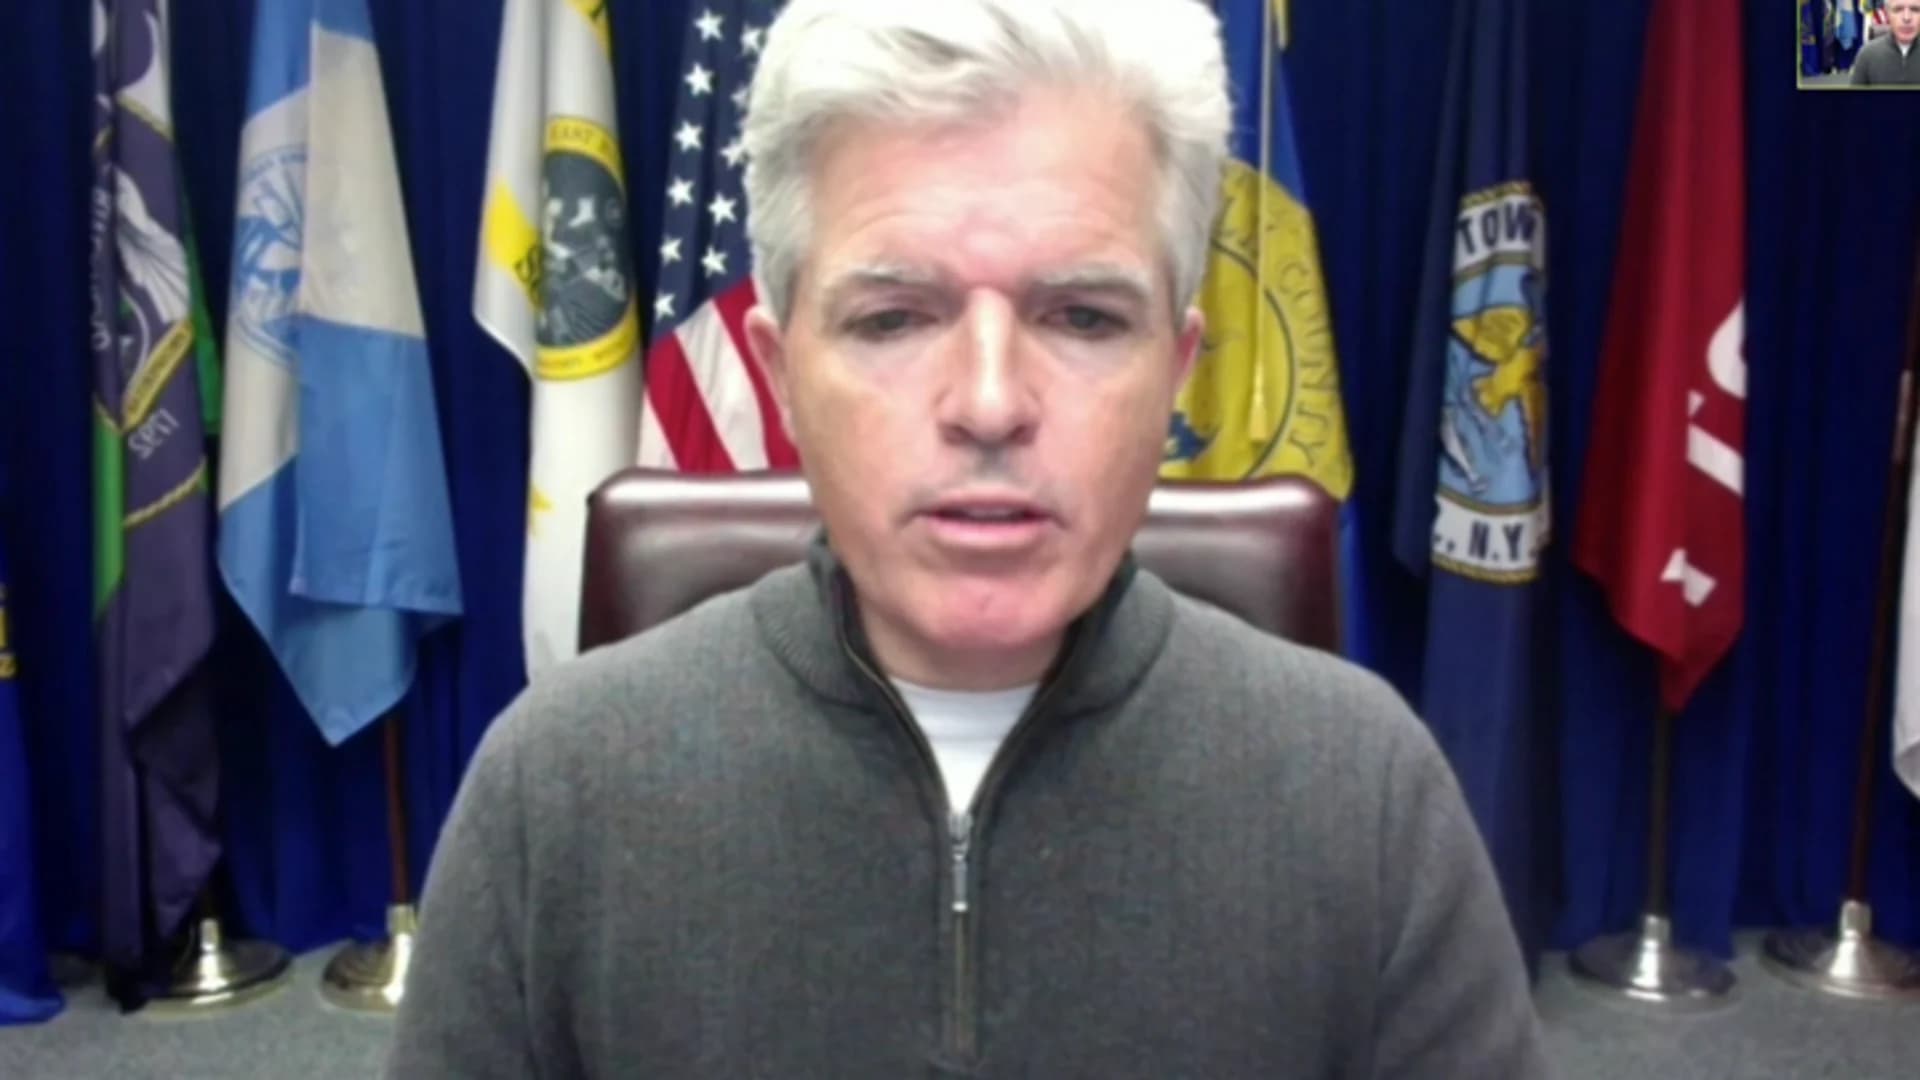 County Executive Steve Bellone gives update on COVID-19 response in Suffolk